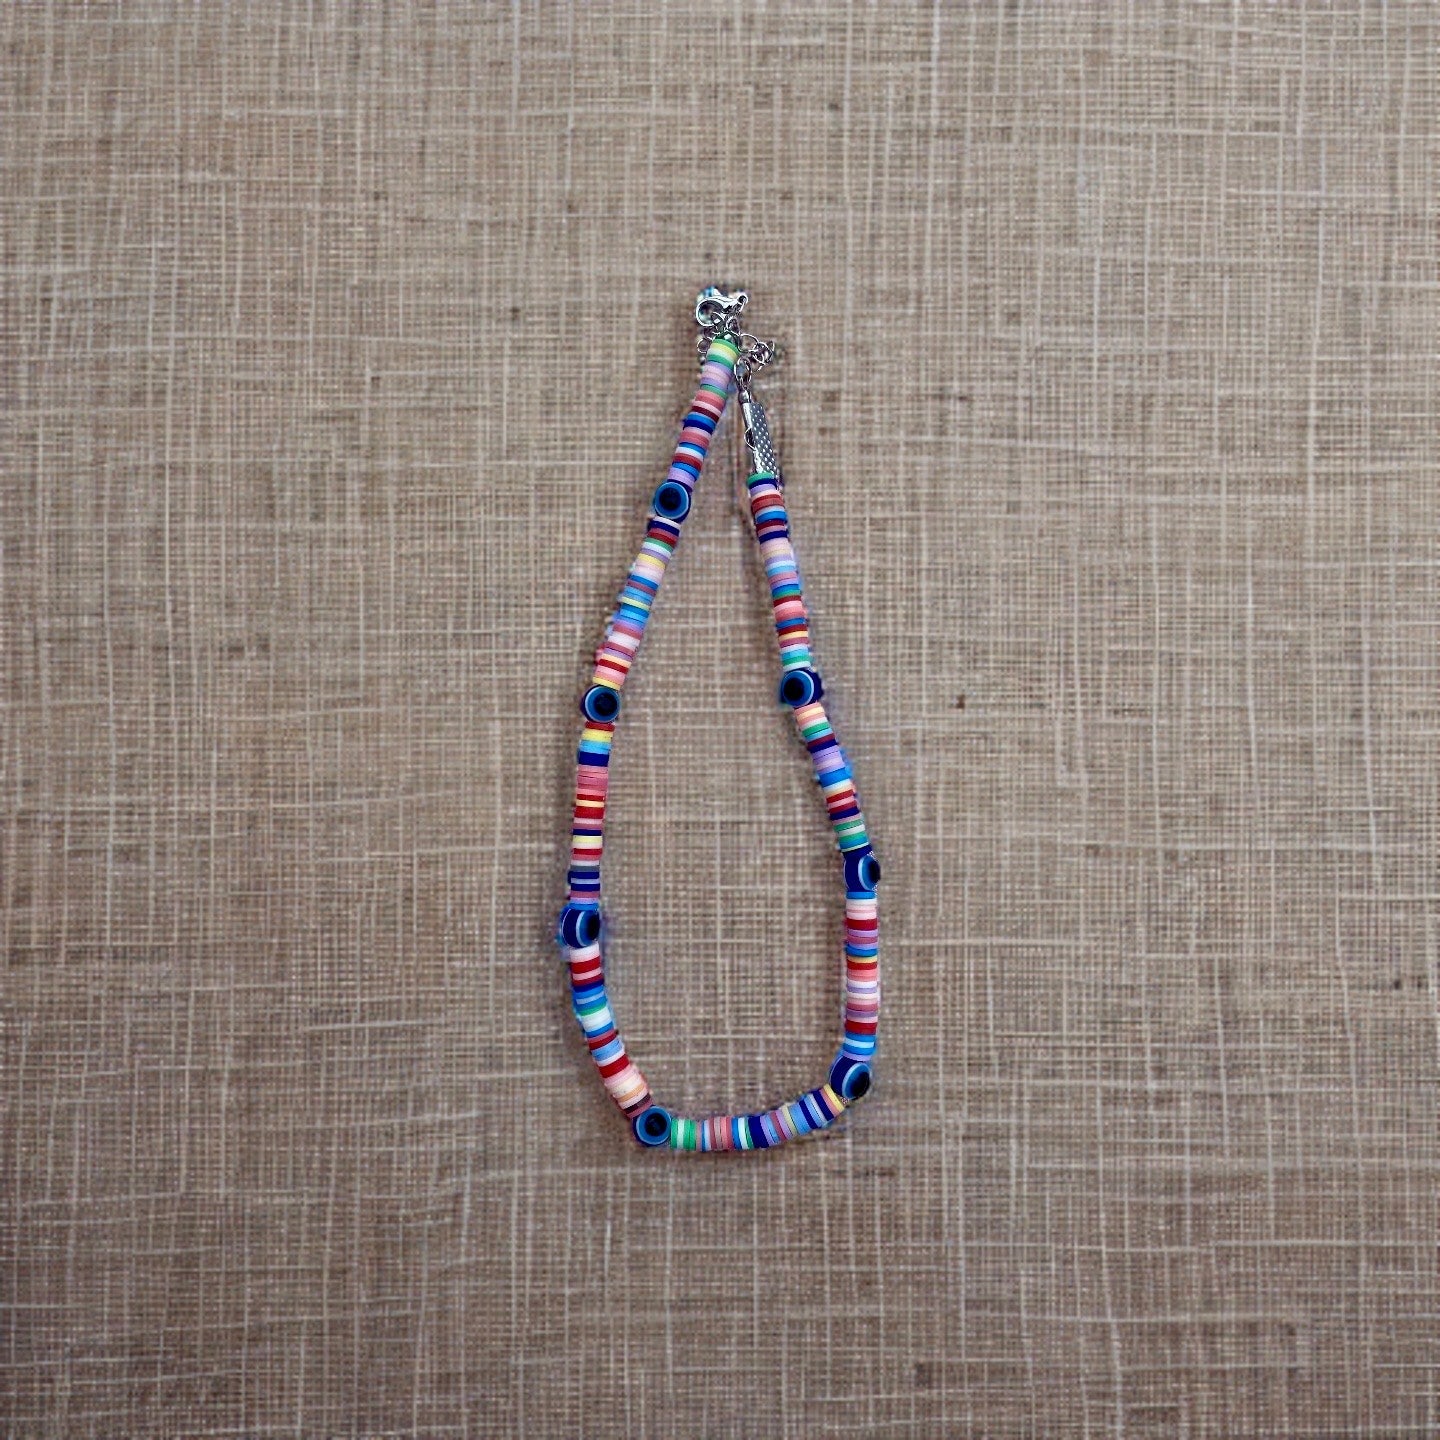 Handmade Bead Necklaces for Positivity and Joy - SBJ